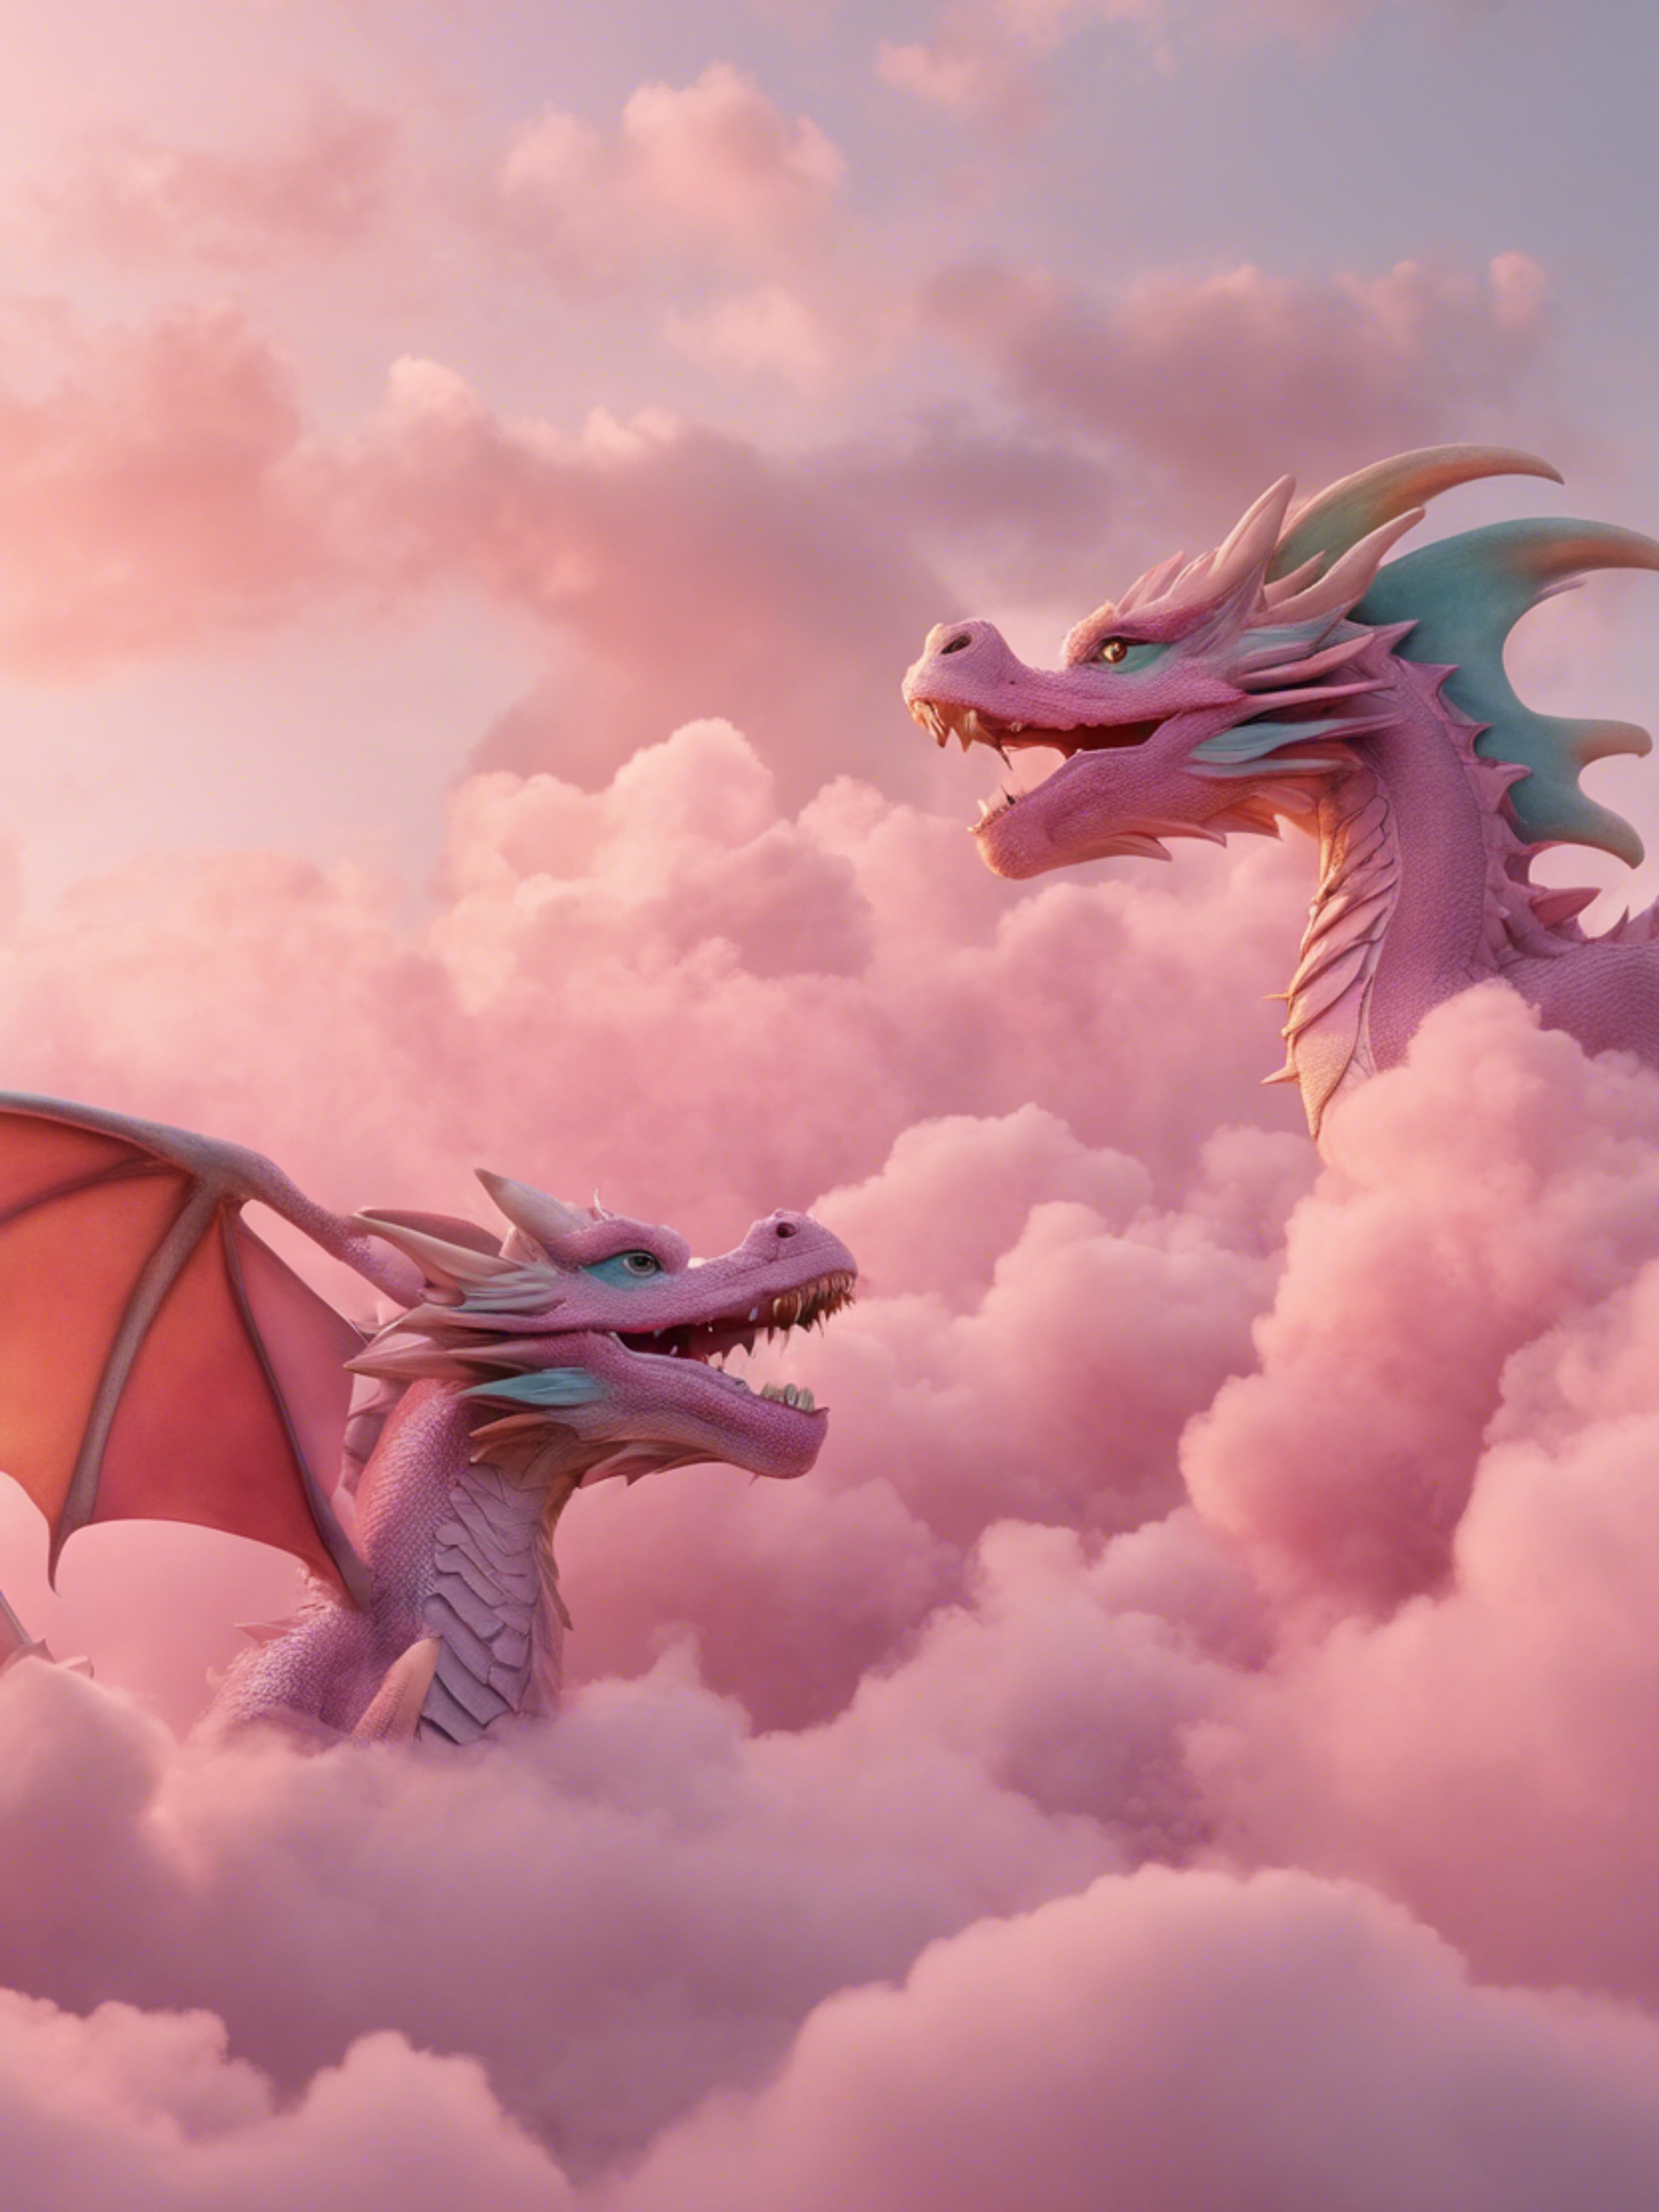 Trio of playful pastel-colored dragons flitting among fluffy pink clouds during sunrise. Wallpaper[e1ca69721ca941939a18]